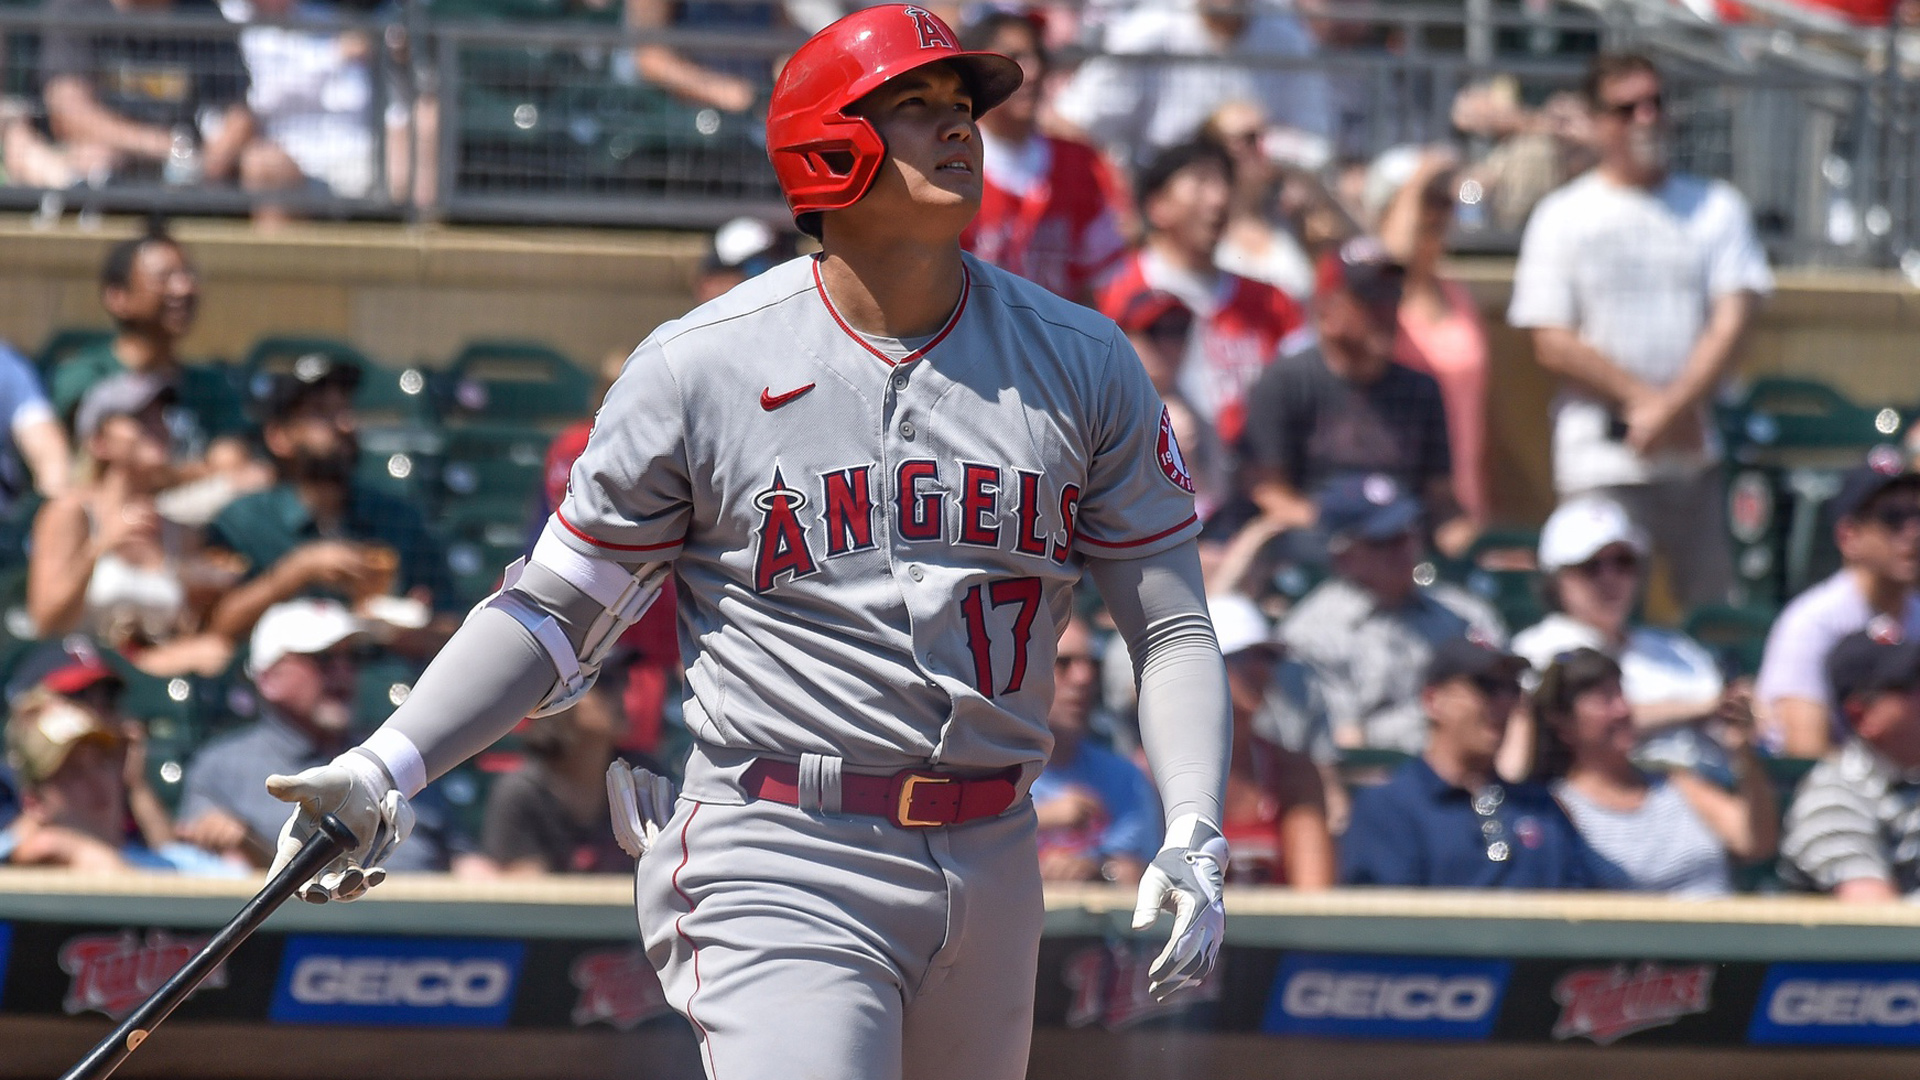 Angels shohei ohtani the wrong and silent type for mlb